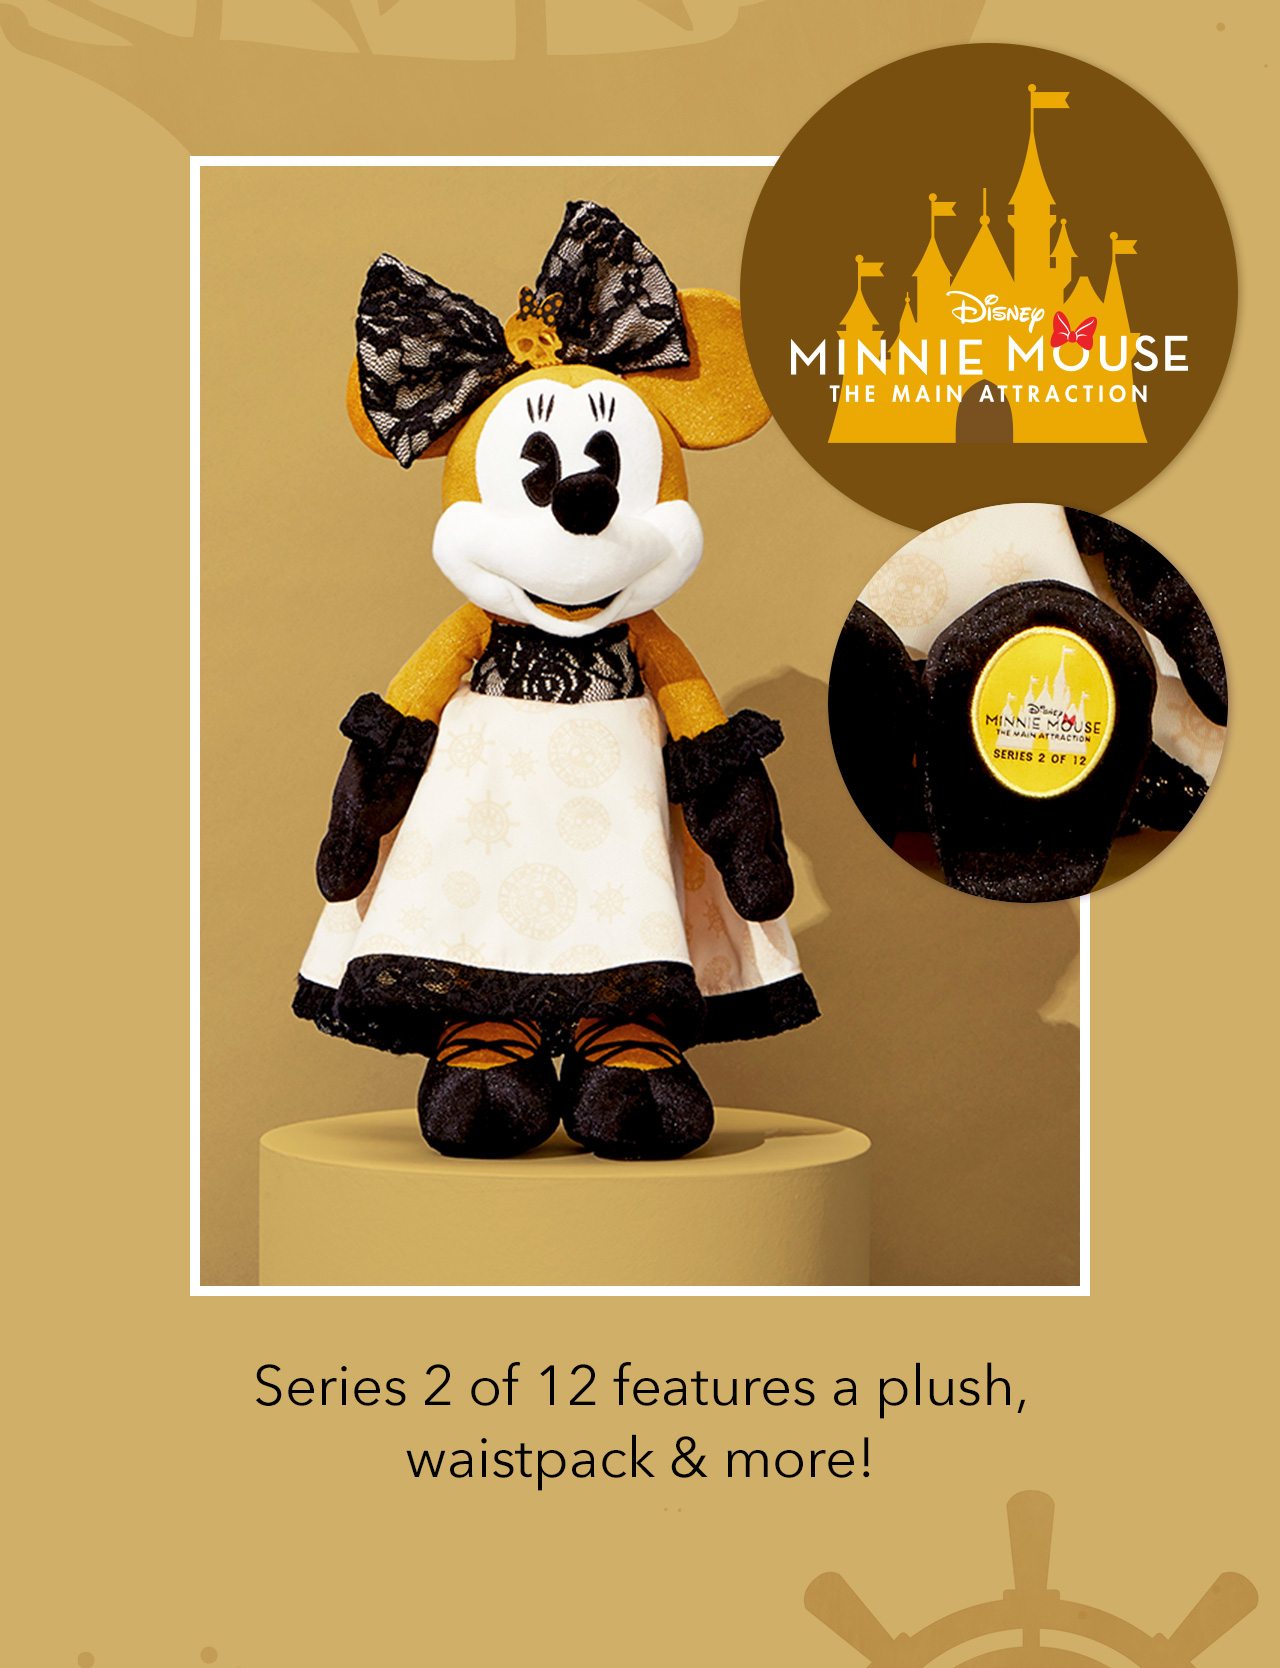 Series 2 of 12 features a plush, waistpack & more!